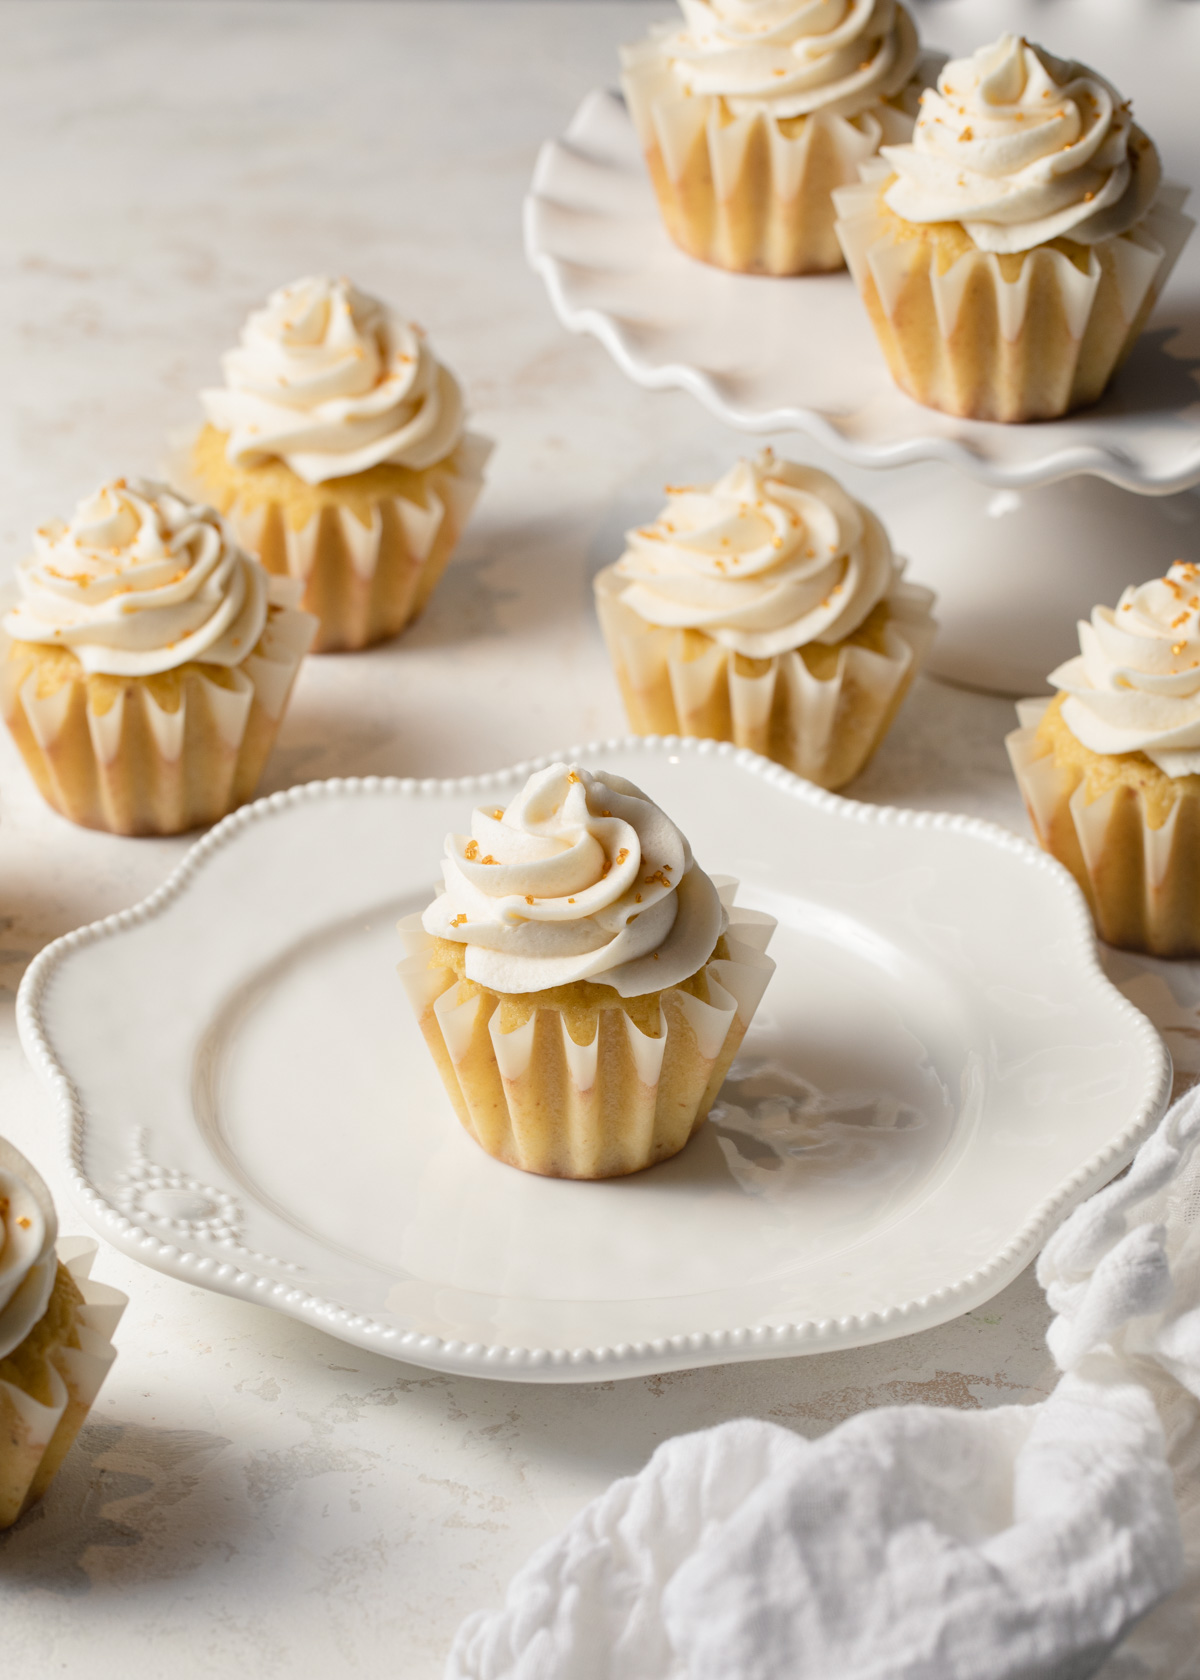 Vanilla cupcakes made with brown butter set on white plates and cake stands.